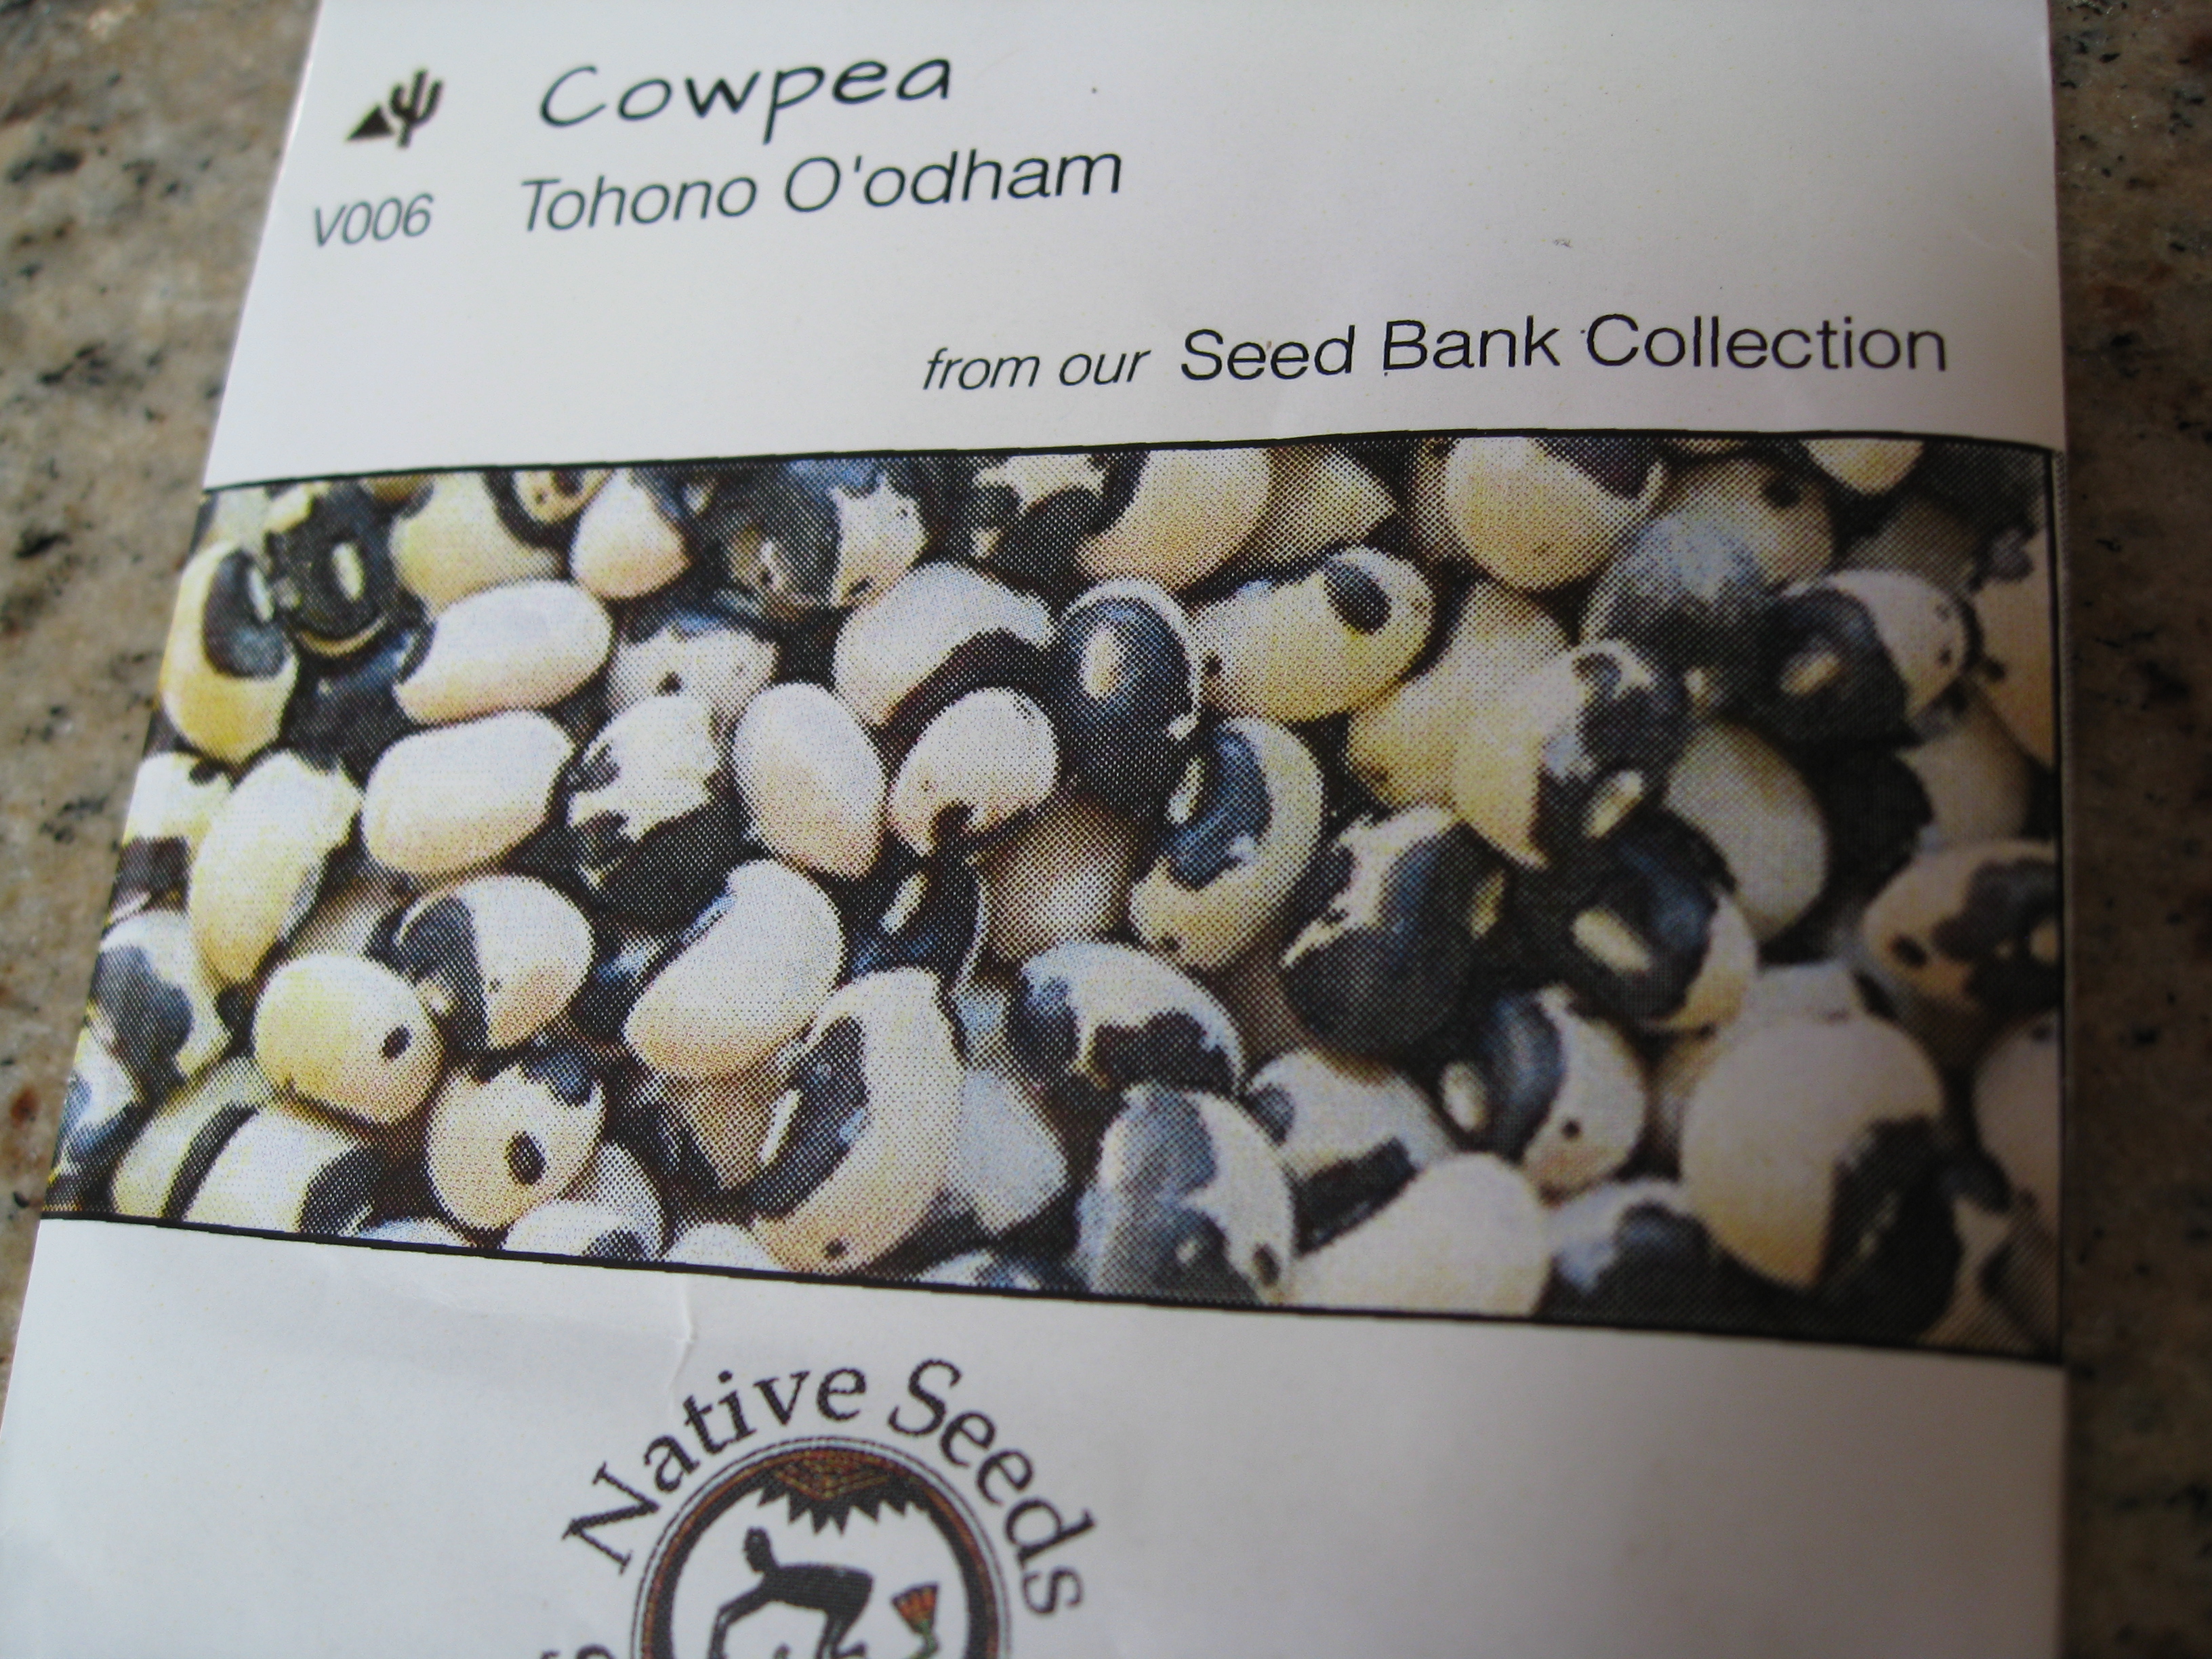 We fell in love with these black and white mottled seeds. 